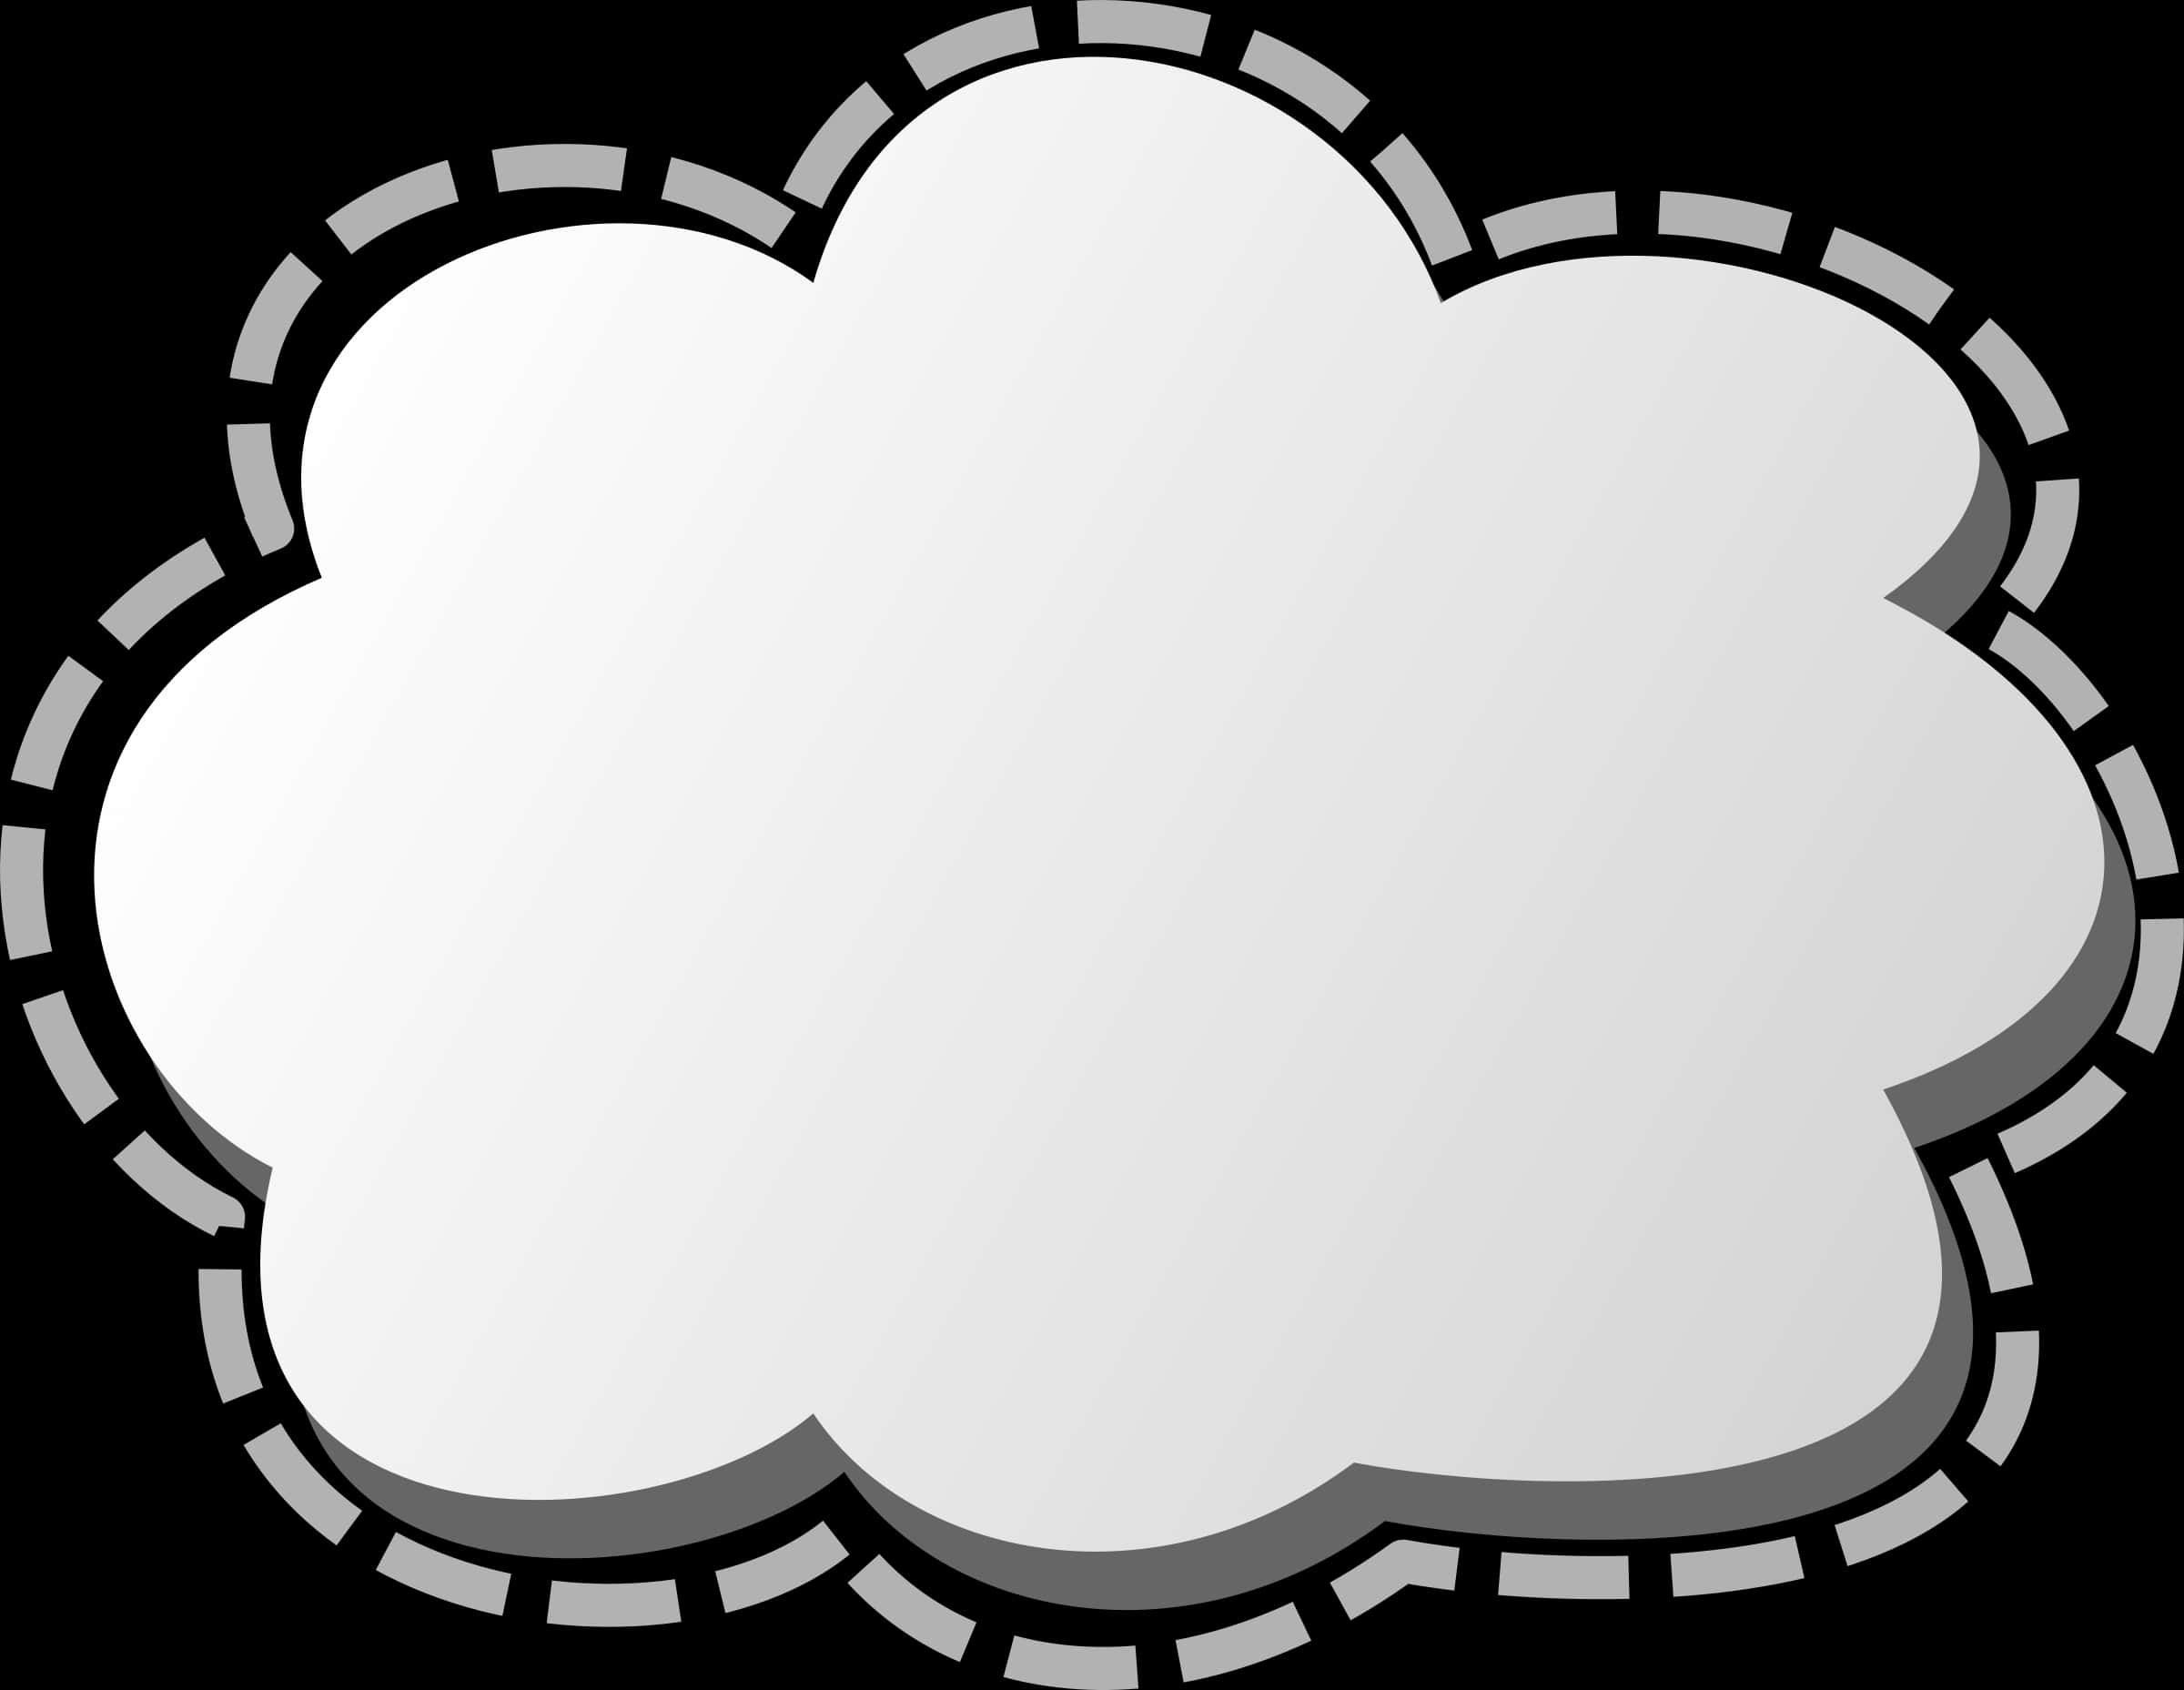 Abstract Cloud Frame Design PNG